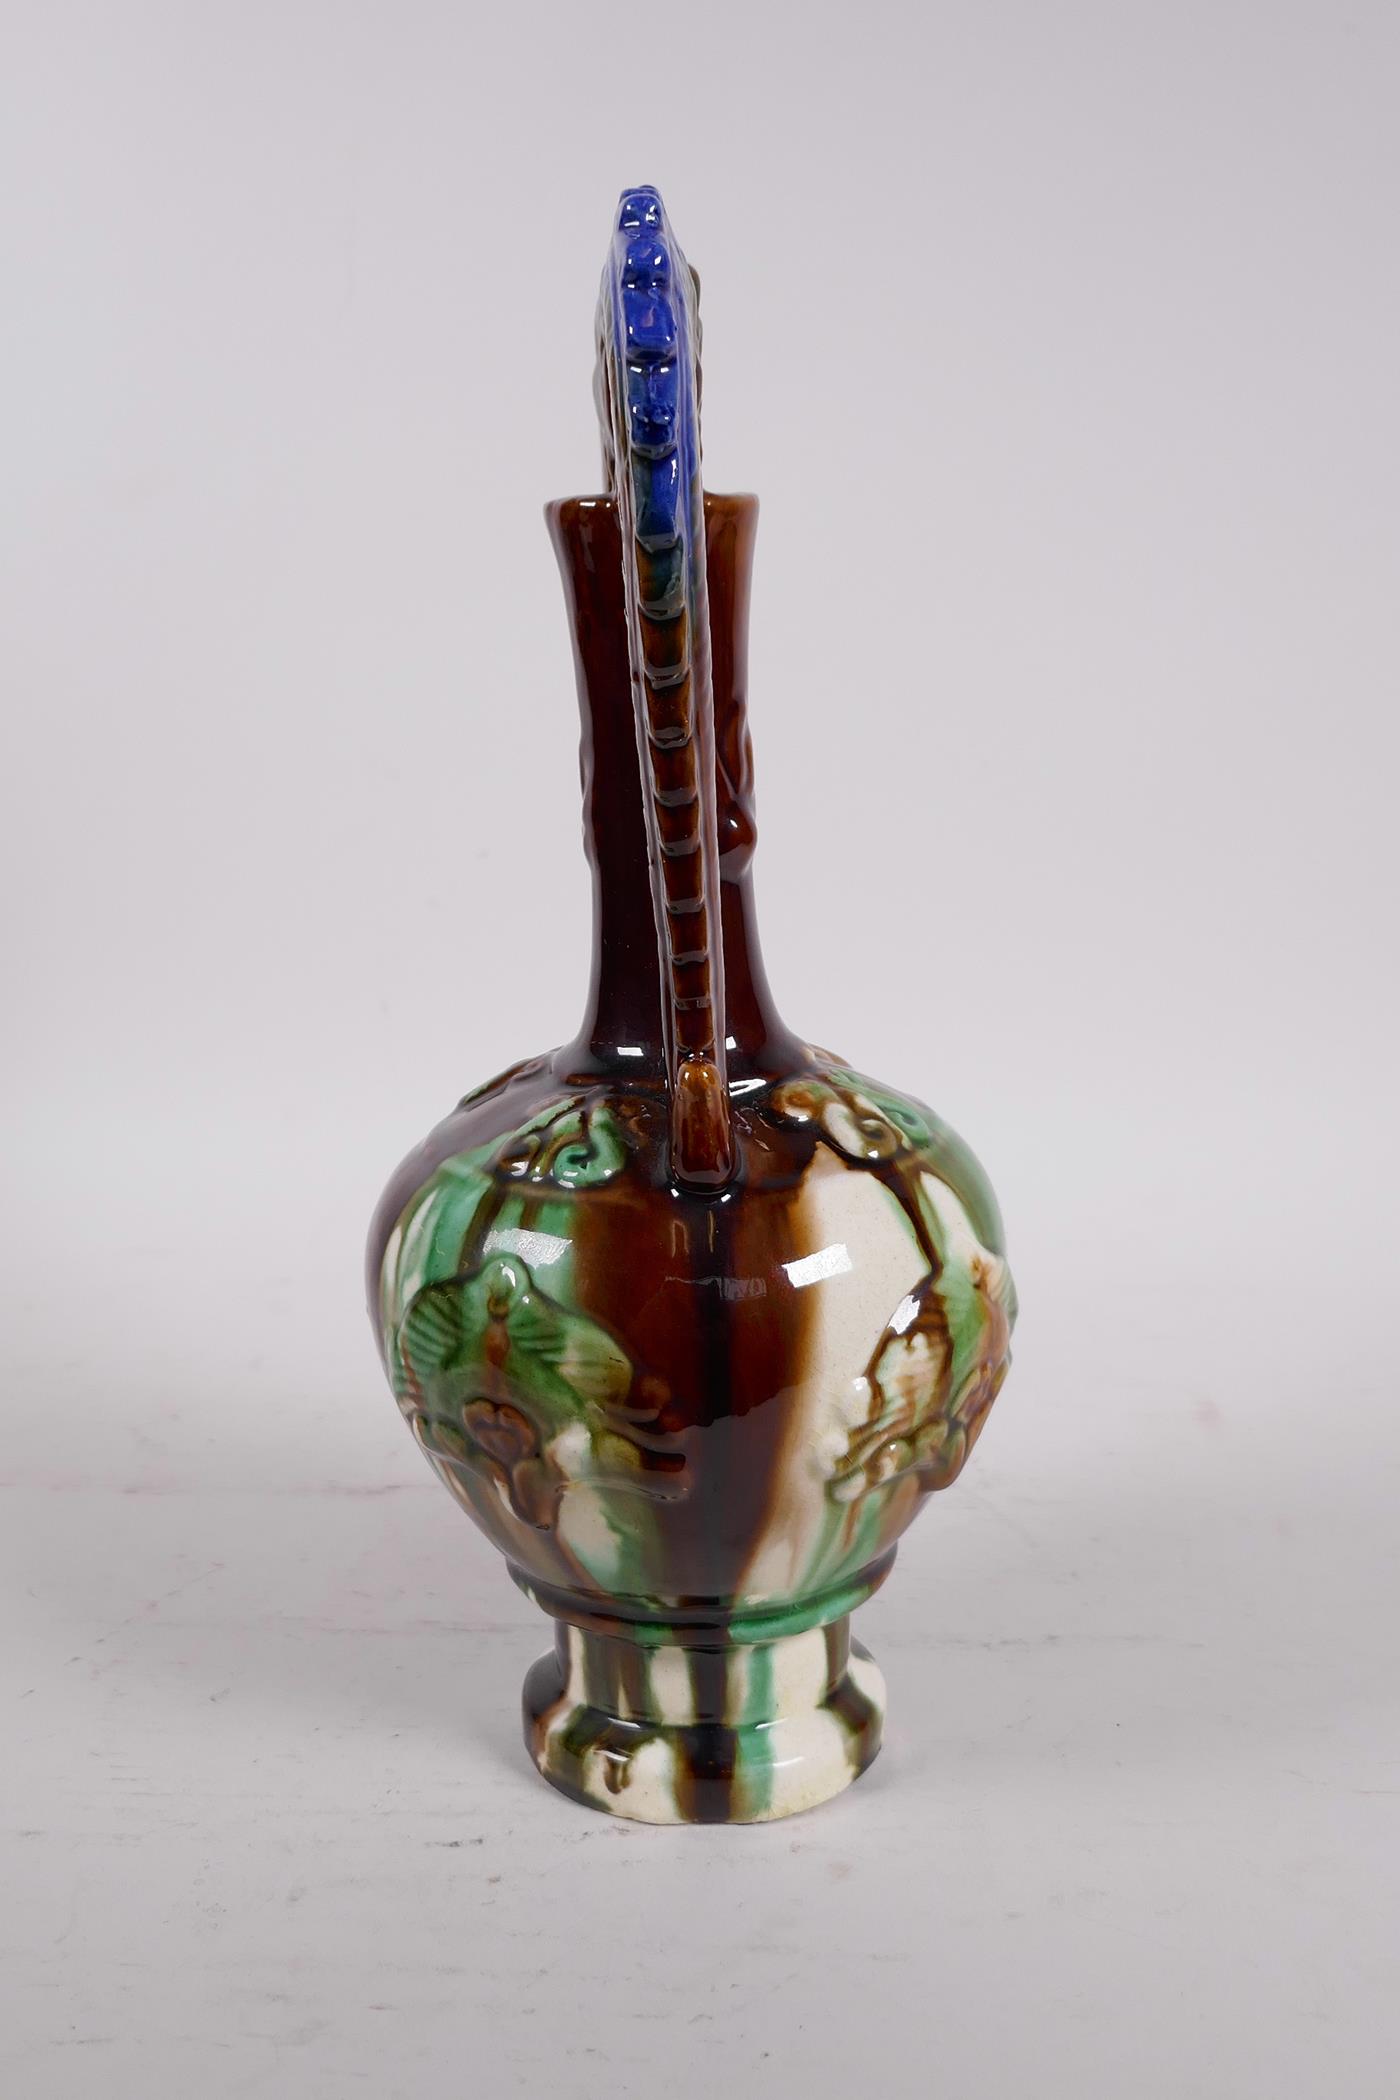 A Chinese Sancai glazed pottery vase with a slender neck and two handles in the form of dragons, - Image 4 of 6